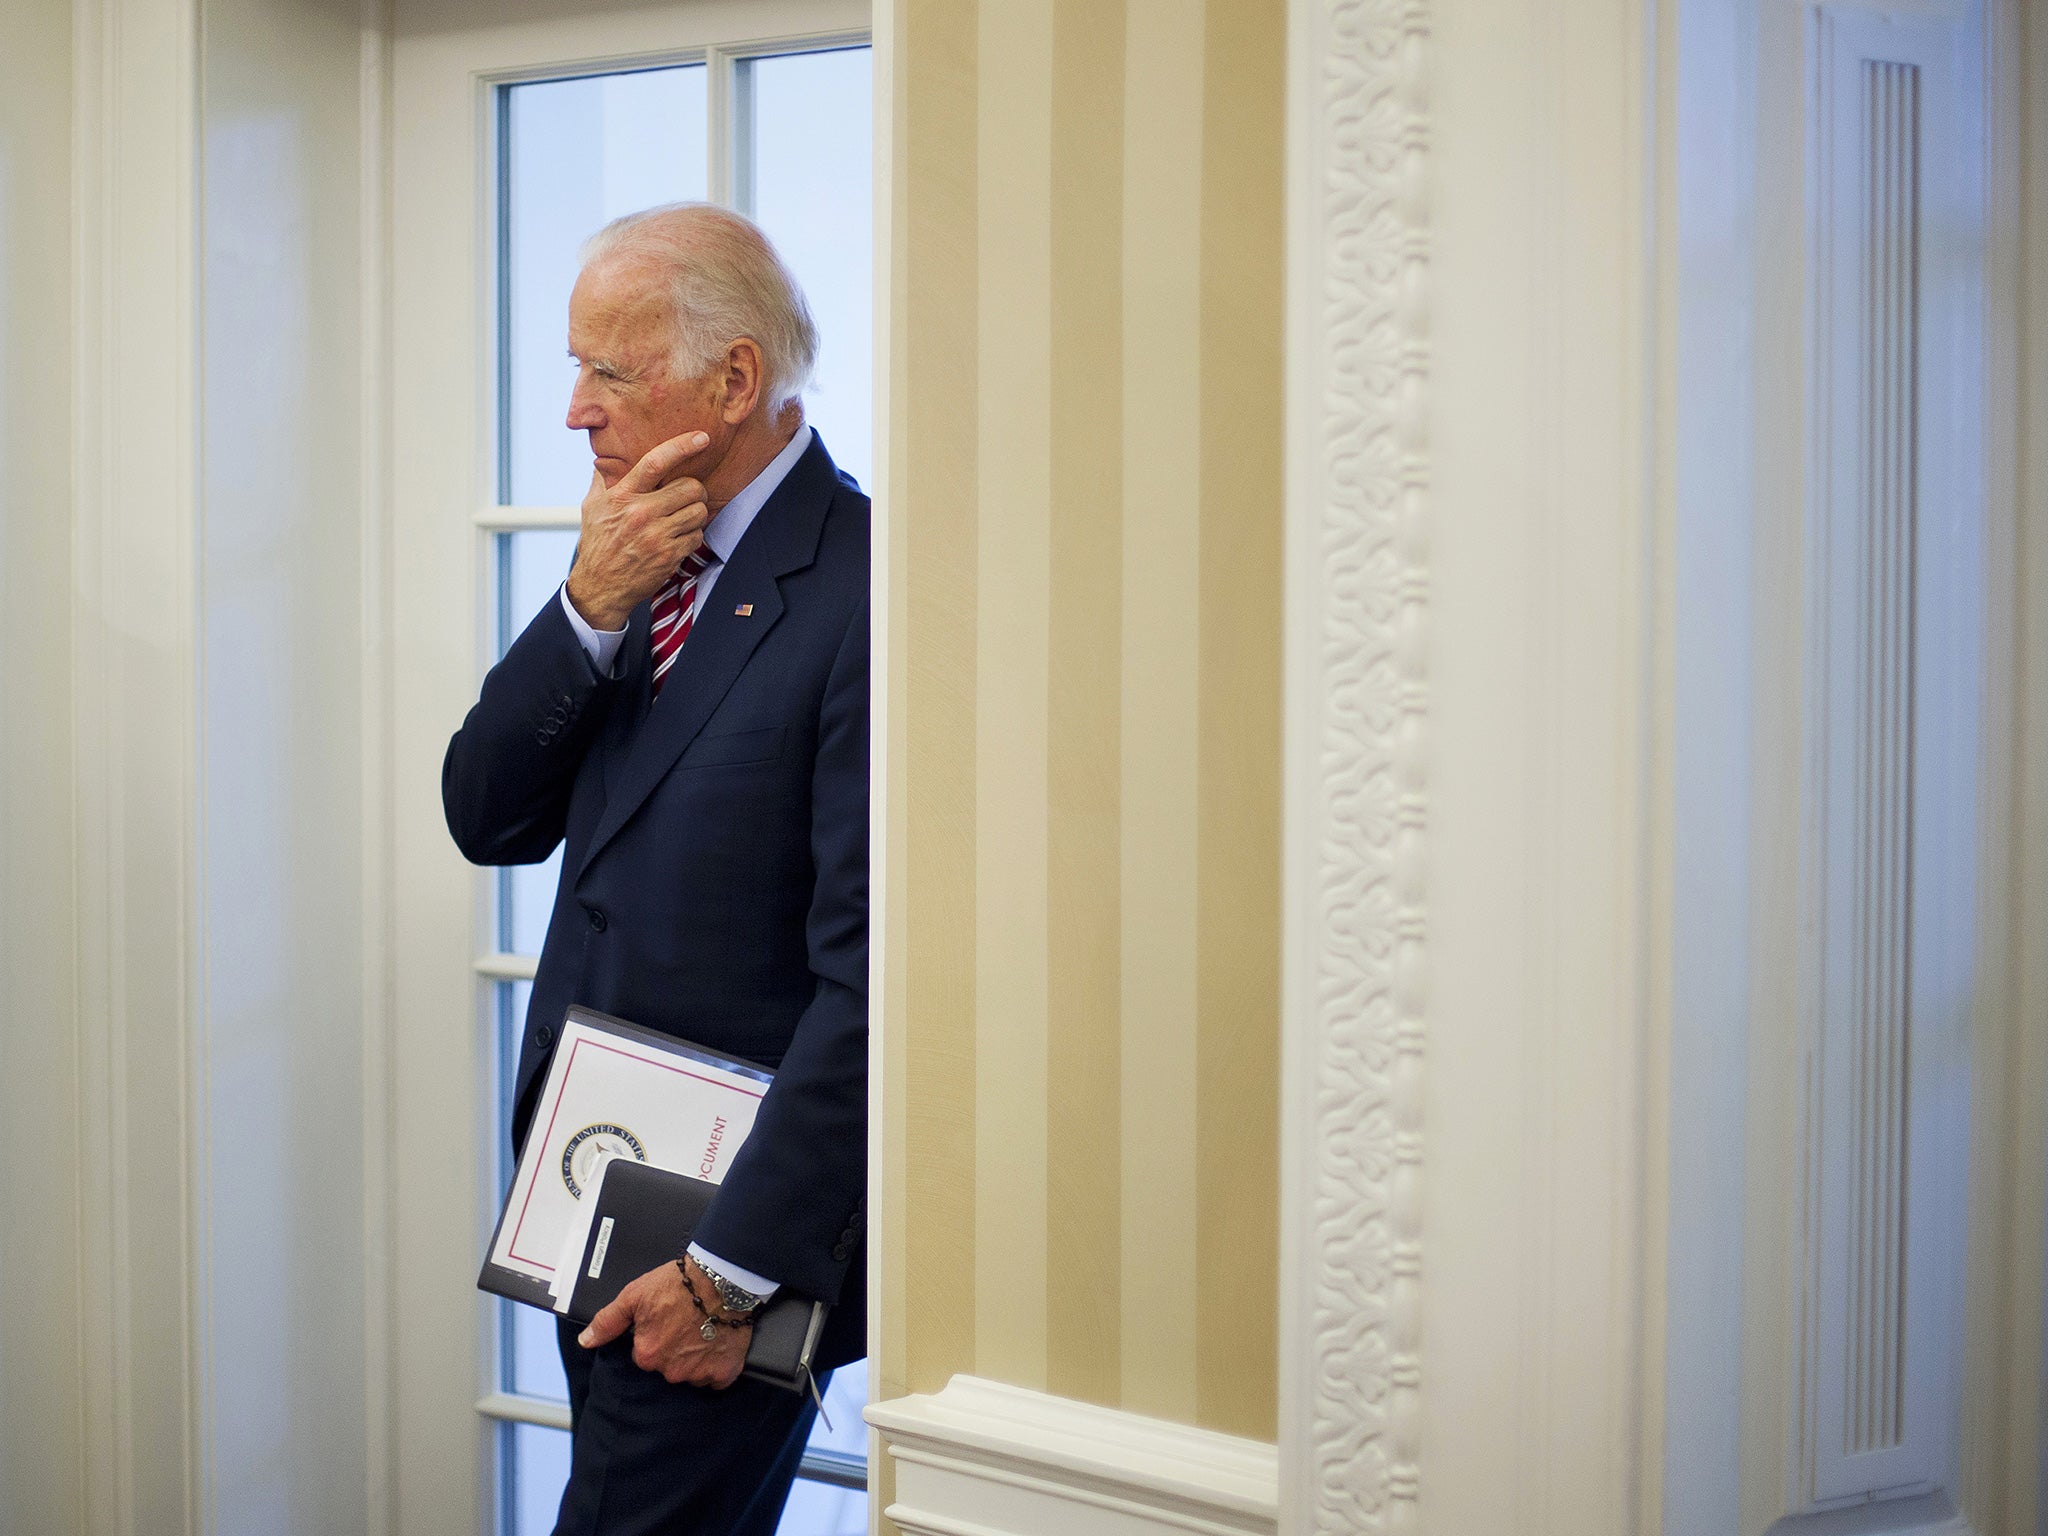 President Obama made Mr Biden promise not to sell his house to pay for medical bills